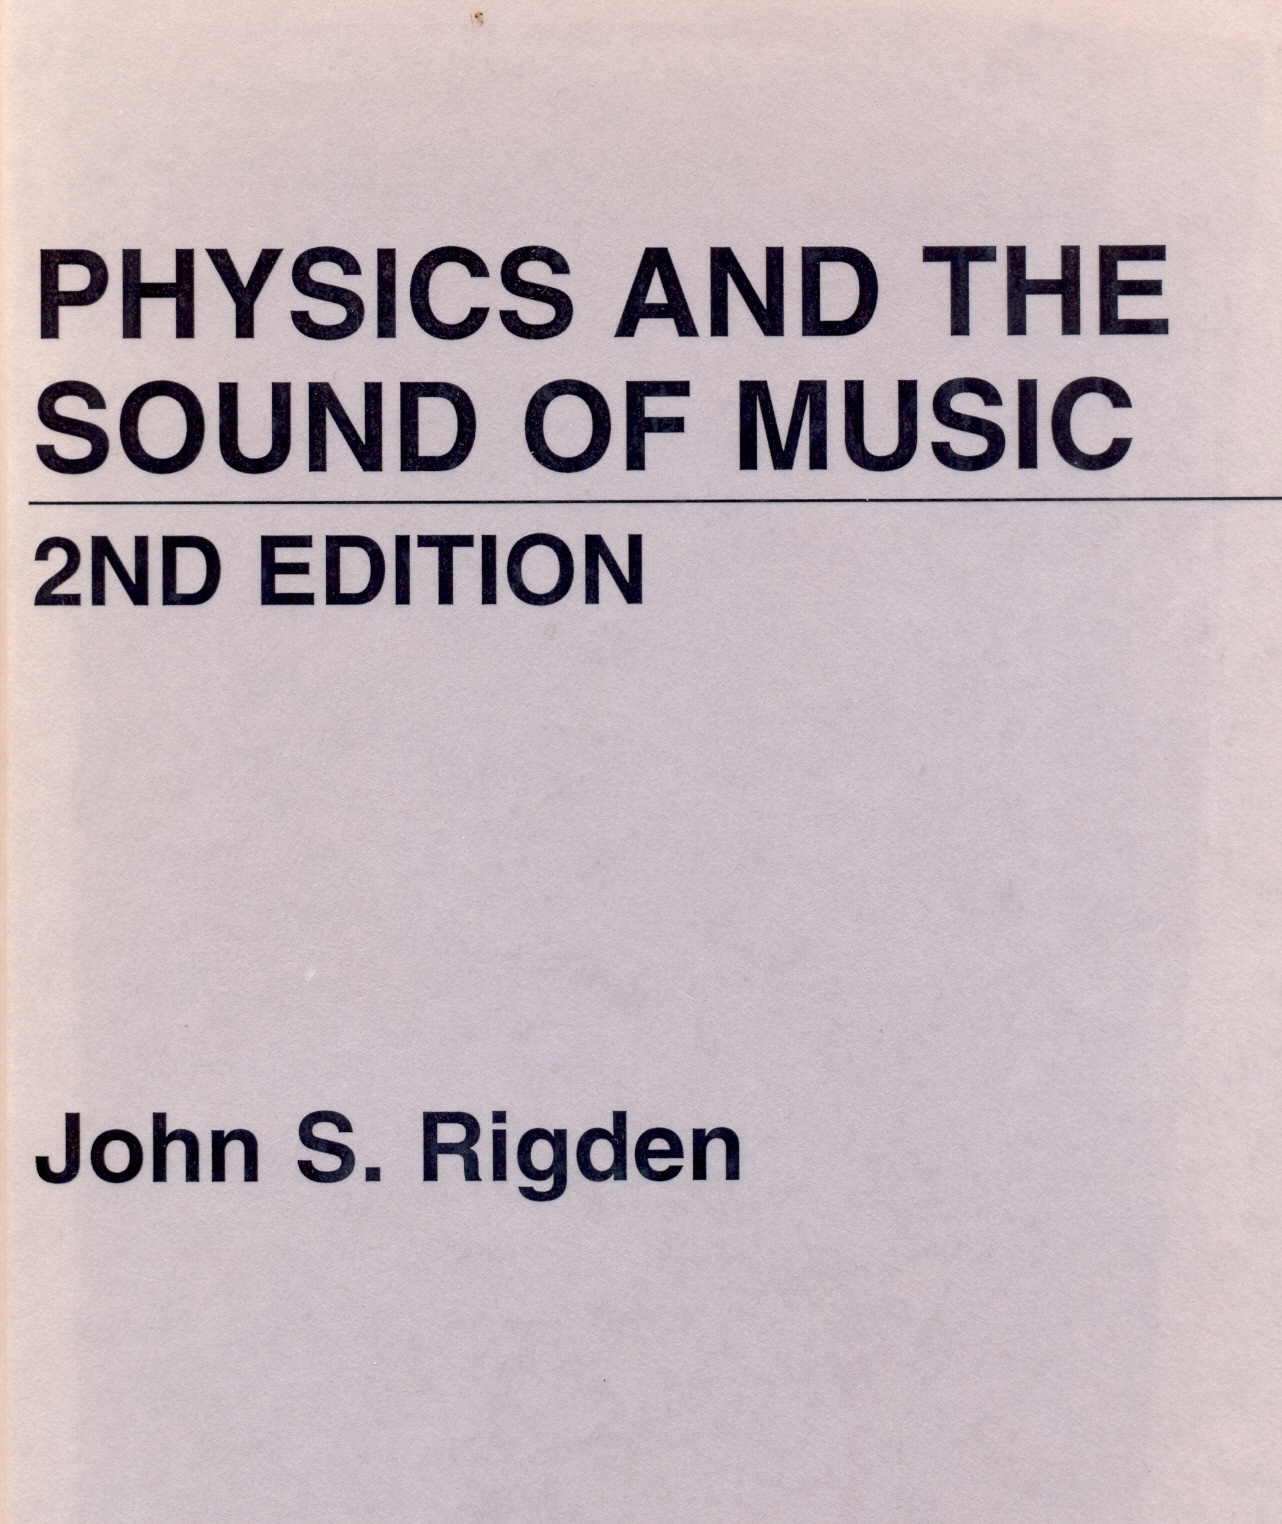 Rigden Physics and the sound of music (Wiley, 1977, 1985) Chap 2 The origin of musical sound Chap 3 Transmission of musical sound Chap 4 The perception of a pure tone Chap 5-6 Superposition Chap 8-9